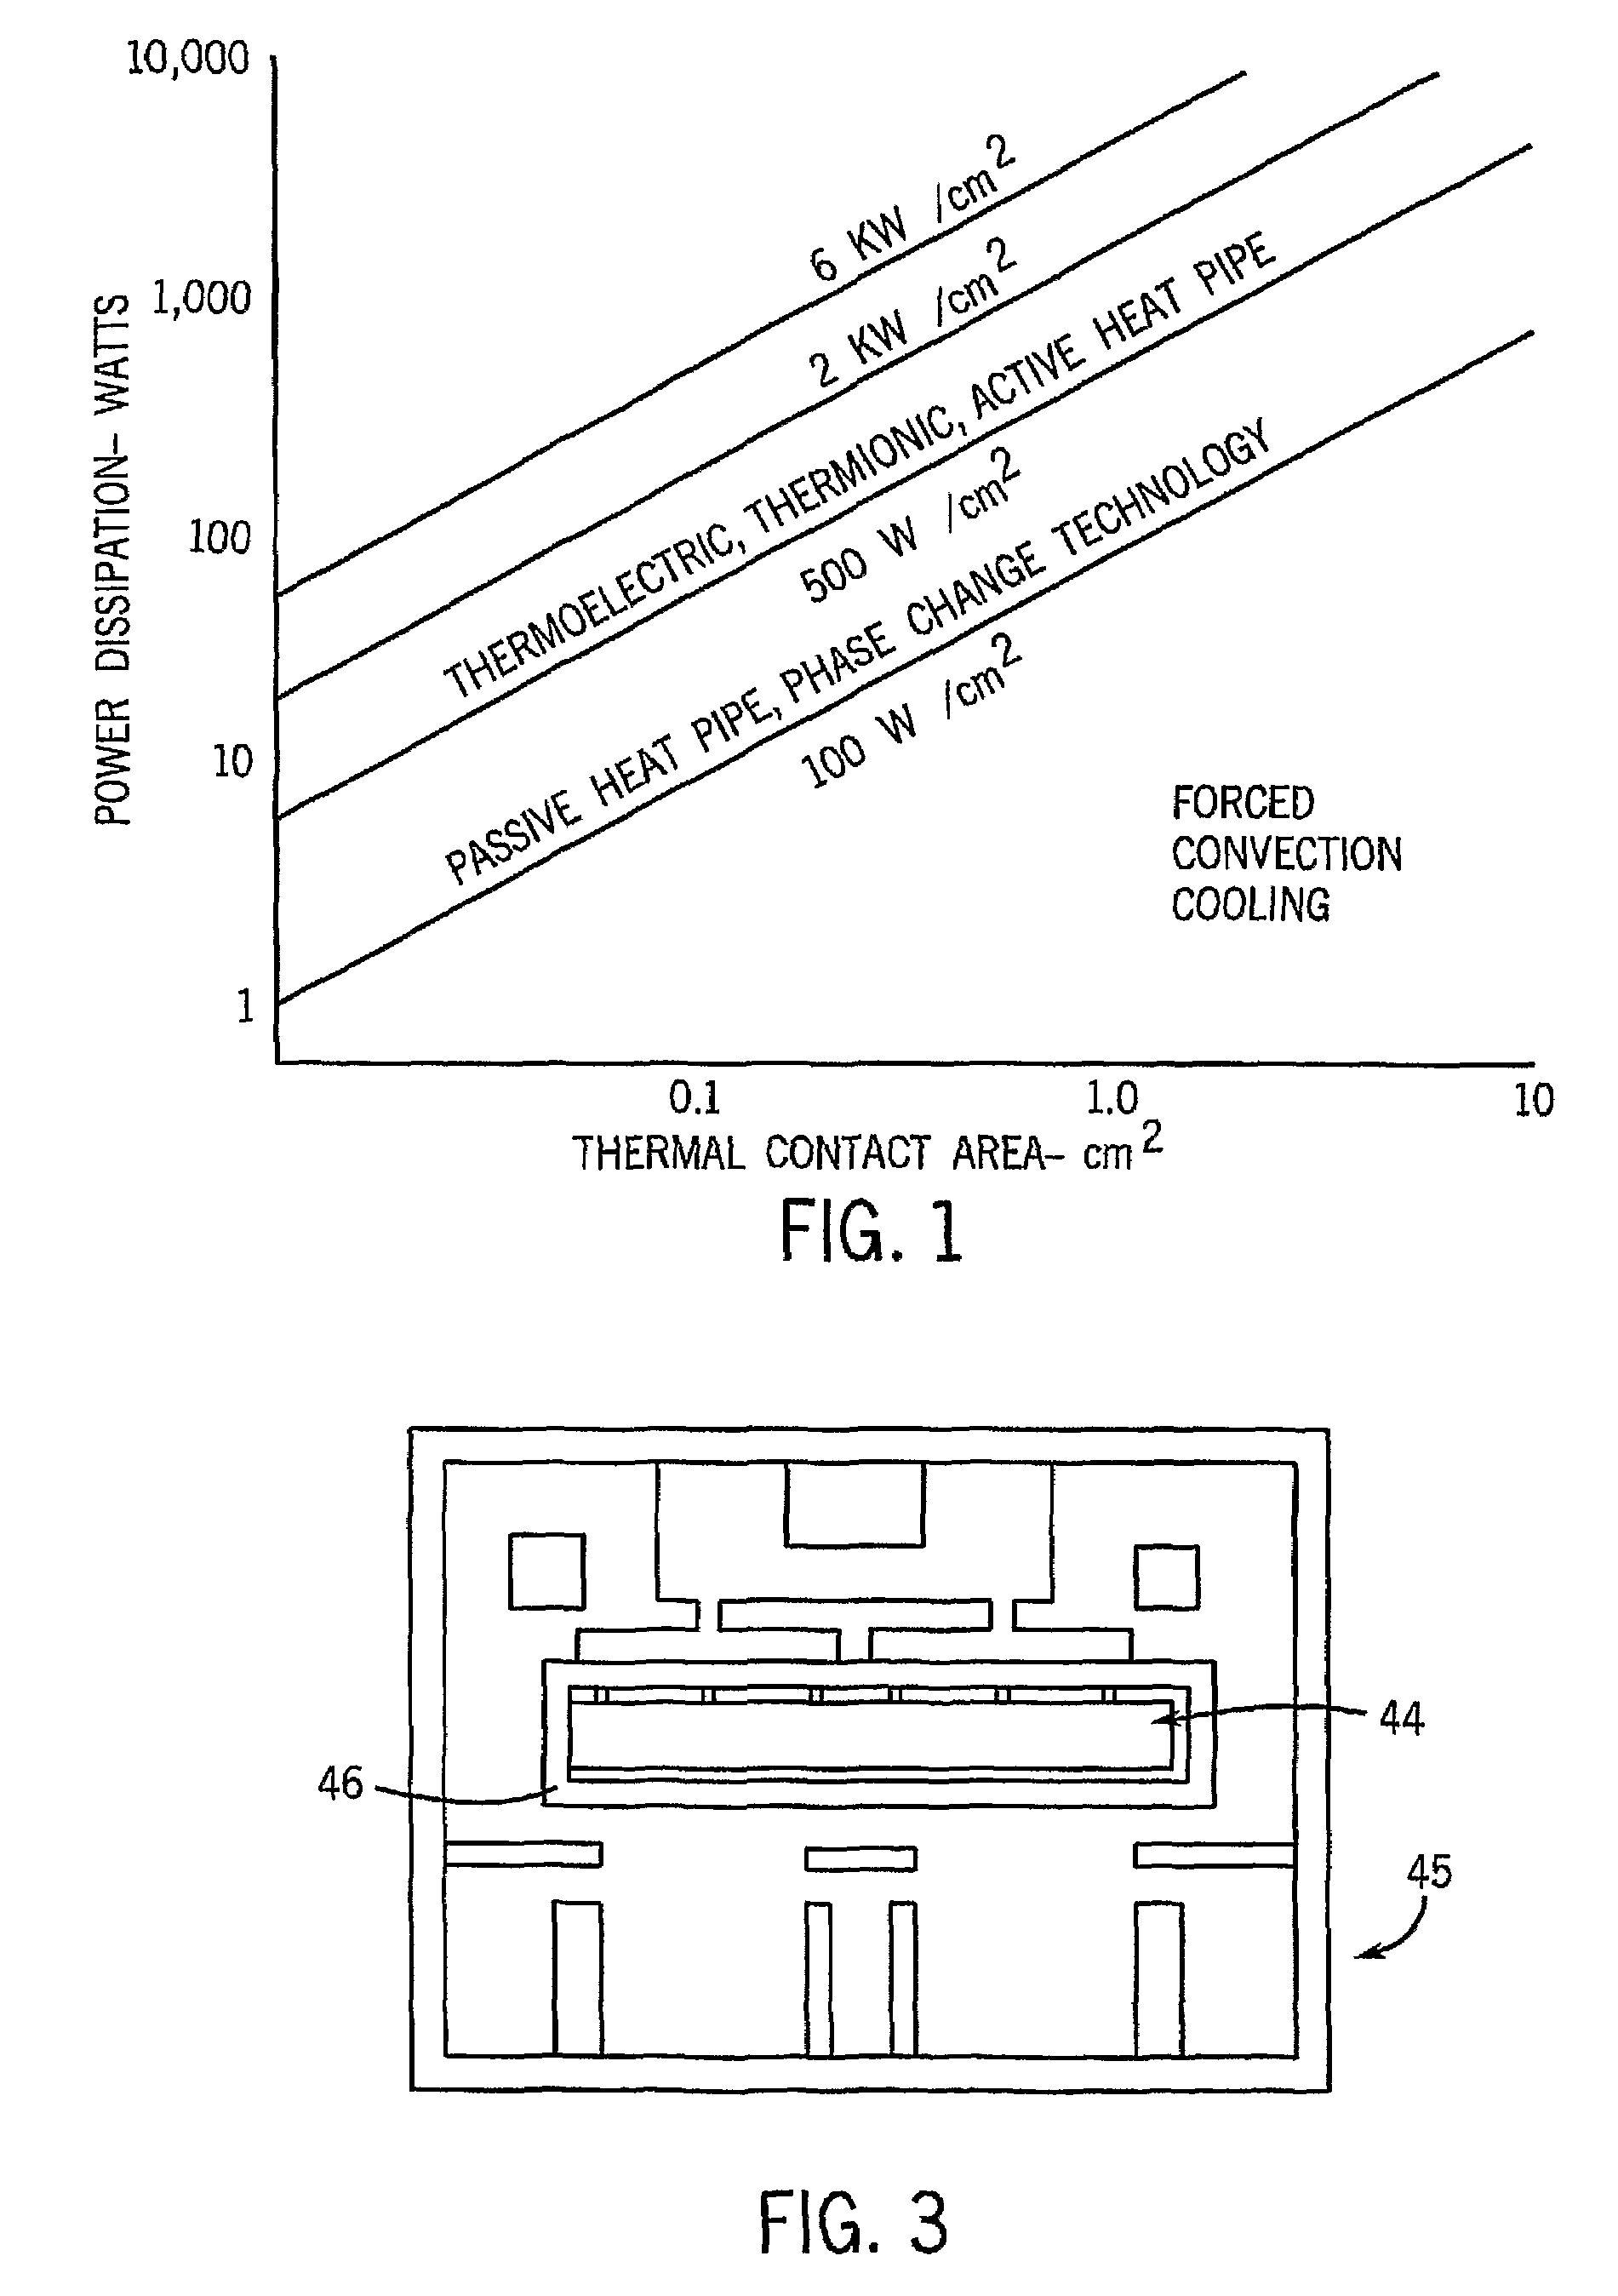 System for controlling the temperature of an associated electronic device using an enclosure having a working fluid arranged therein and a chemical compound in the working fluid that undergoes a reversible chemical reaction to move heat from the associated electronic device